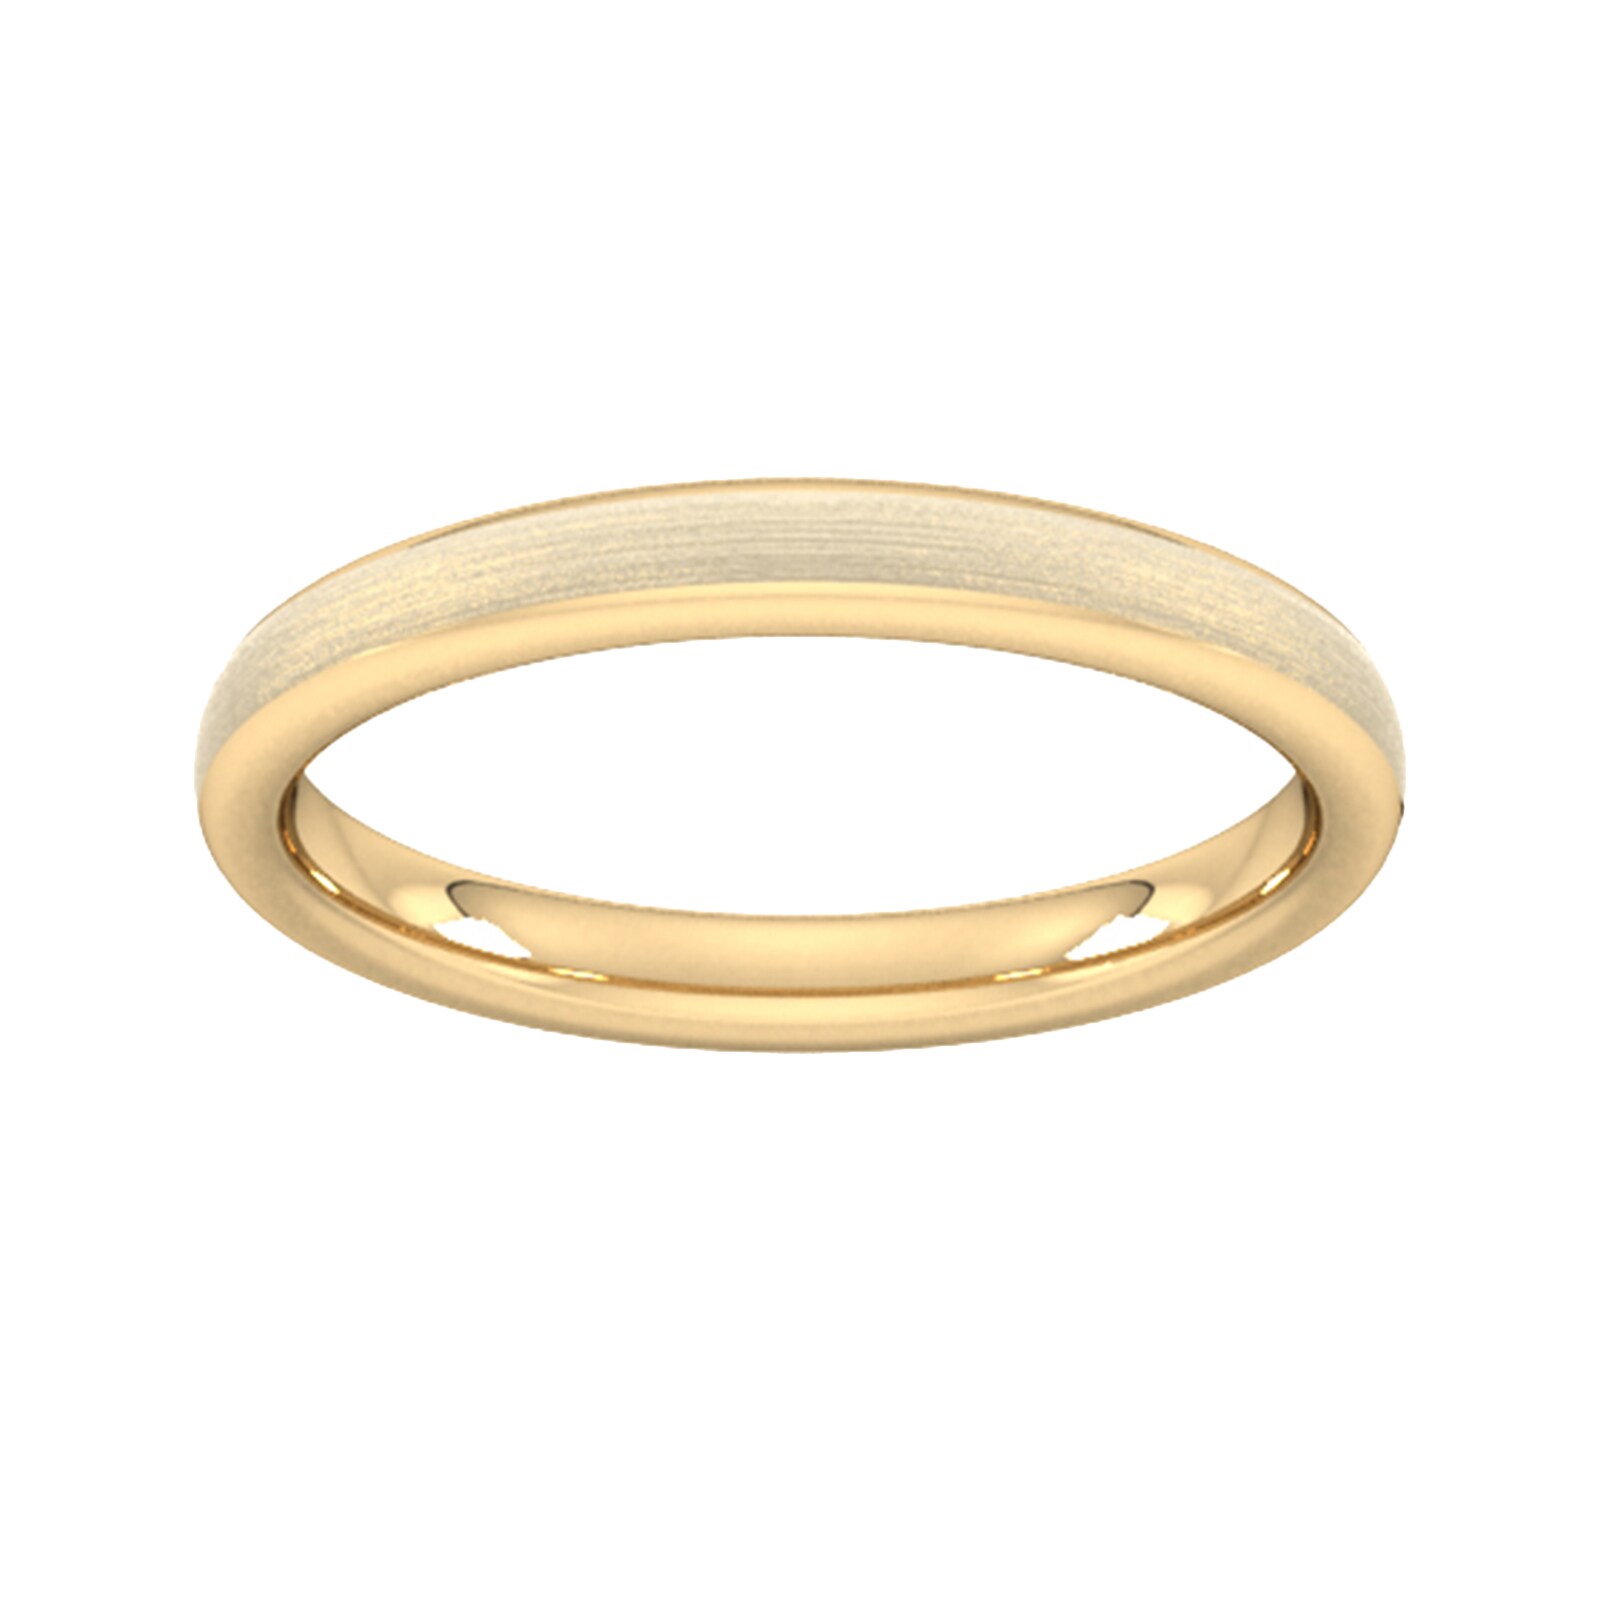 2.5mm D Shape Heavy Matt Finished Wedding Ring In 18 Carat Yellow Gold - Ring Size R